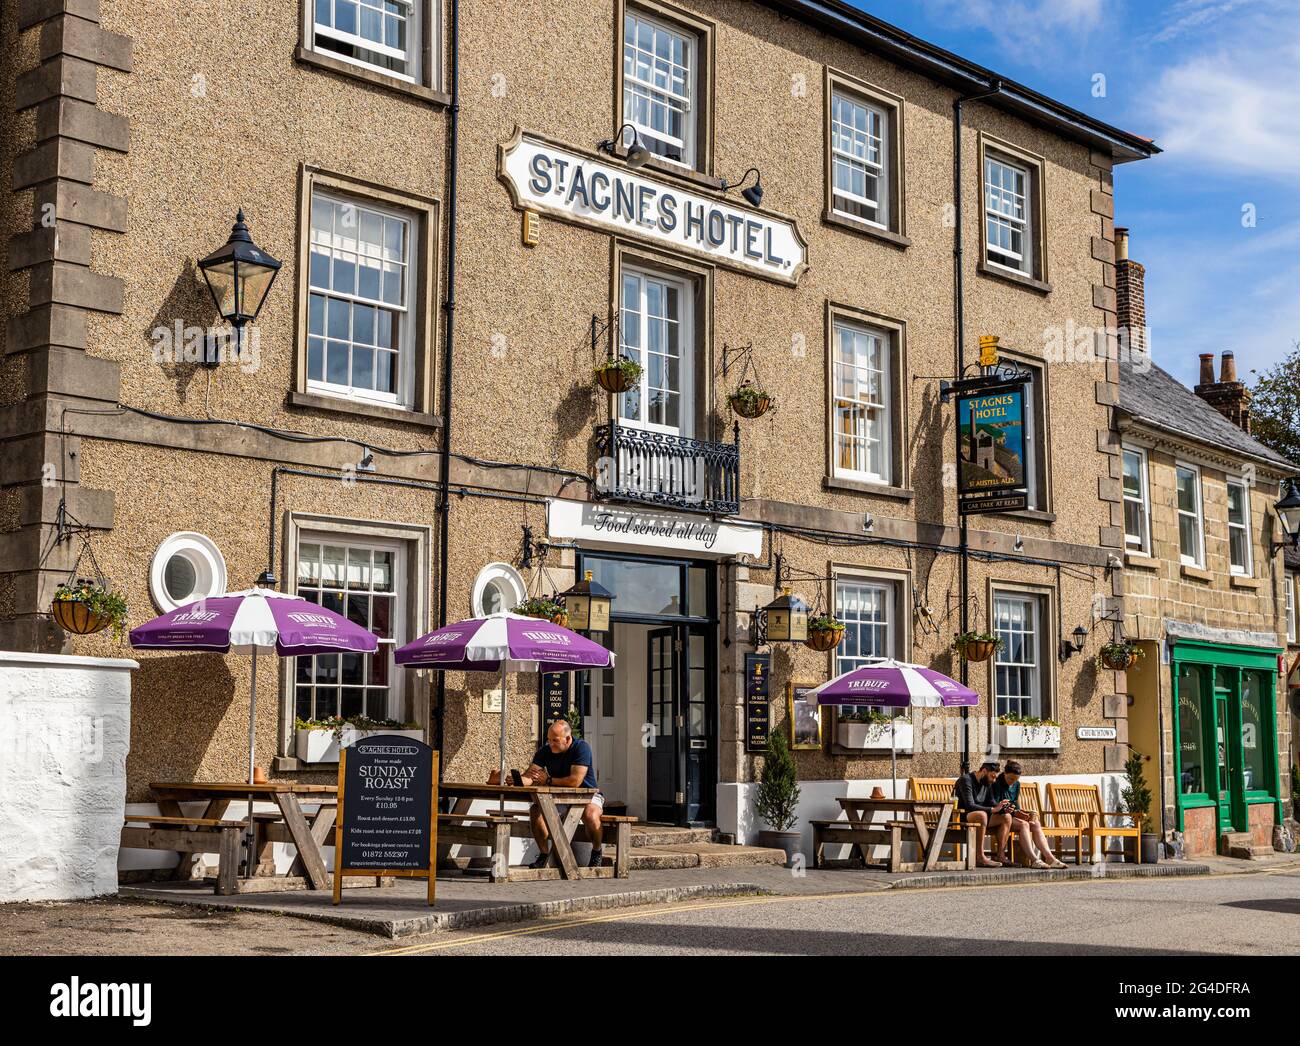 St Agnes hotel a 17th century pub now run as a B&B situated in the heart of this picturesque Cornish village during the summer Cornwall England UK Stock Photo